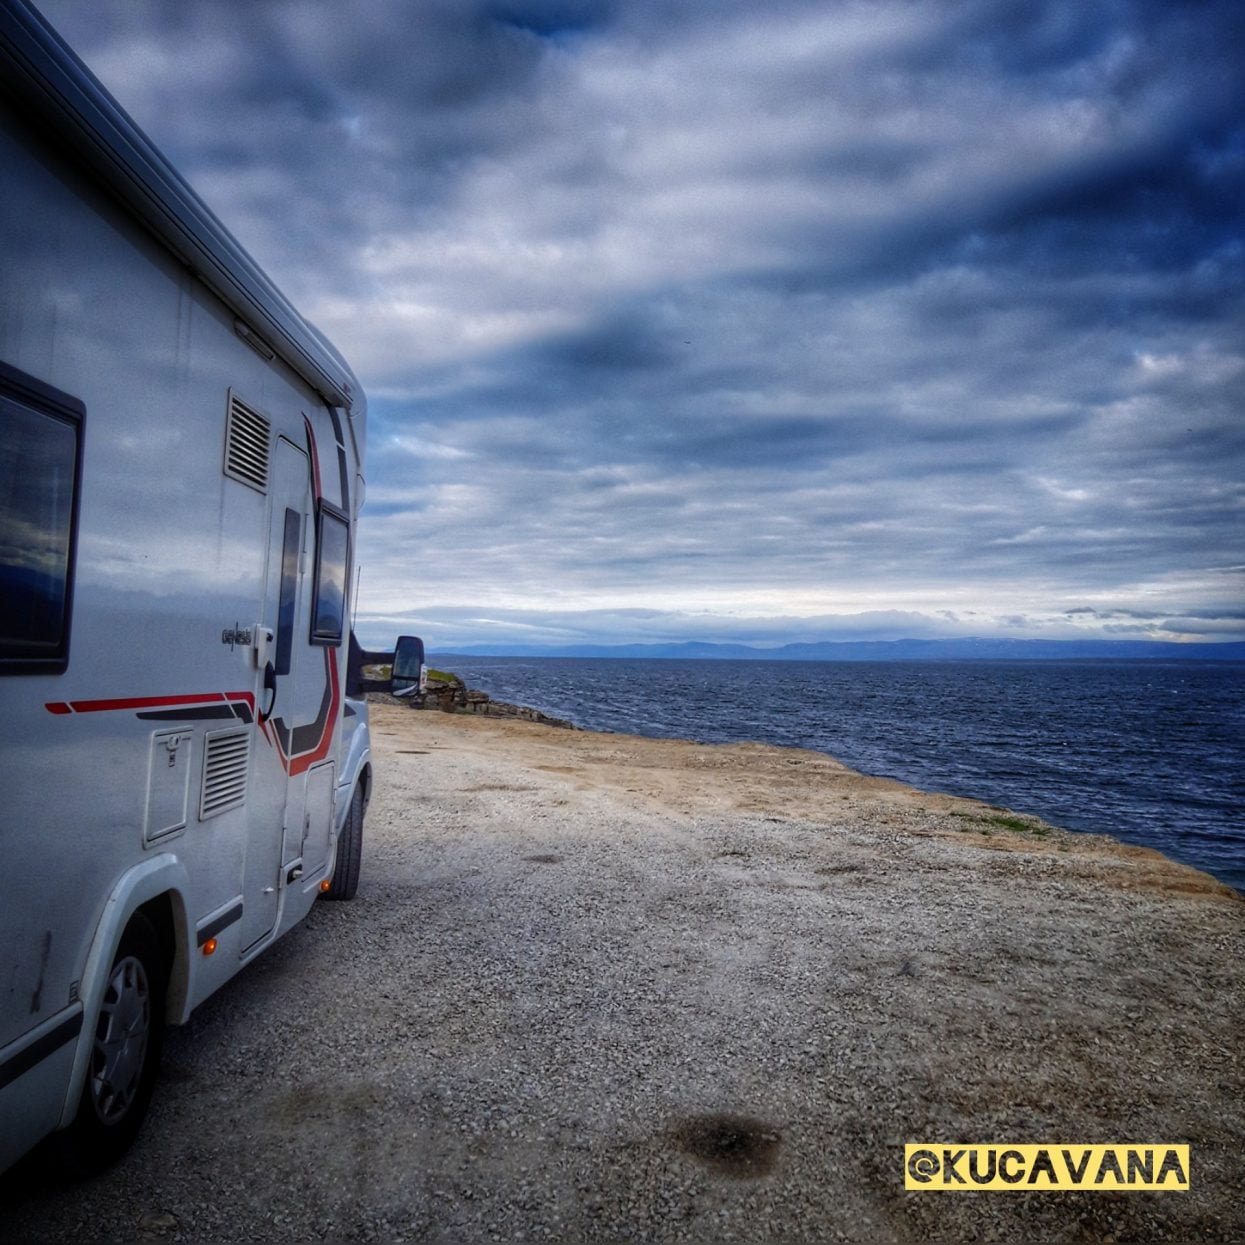 At this moment you are looking at ⭐ Definitive Manual 【2021】 - To travel by motorhome ⭐